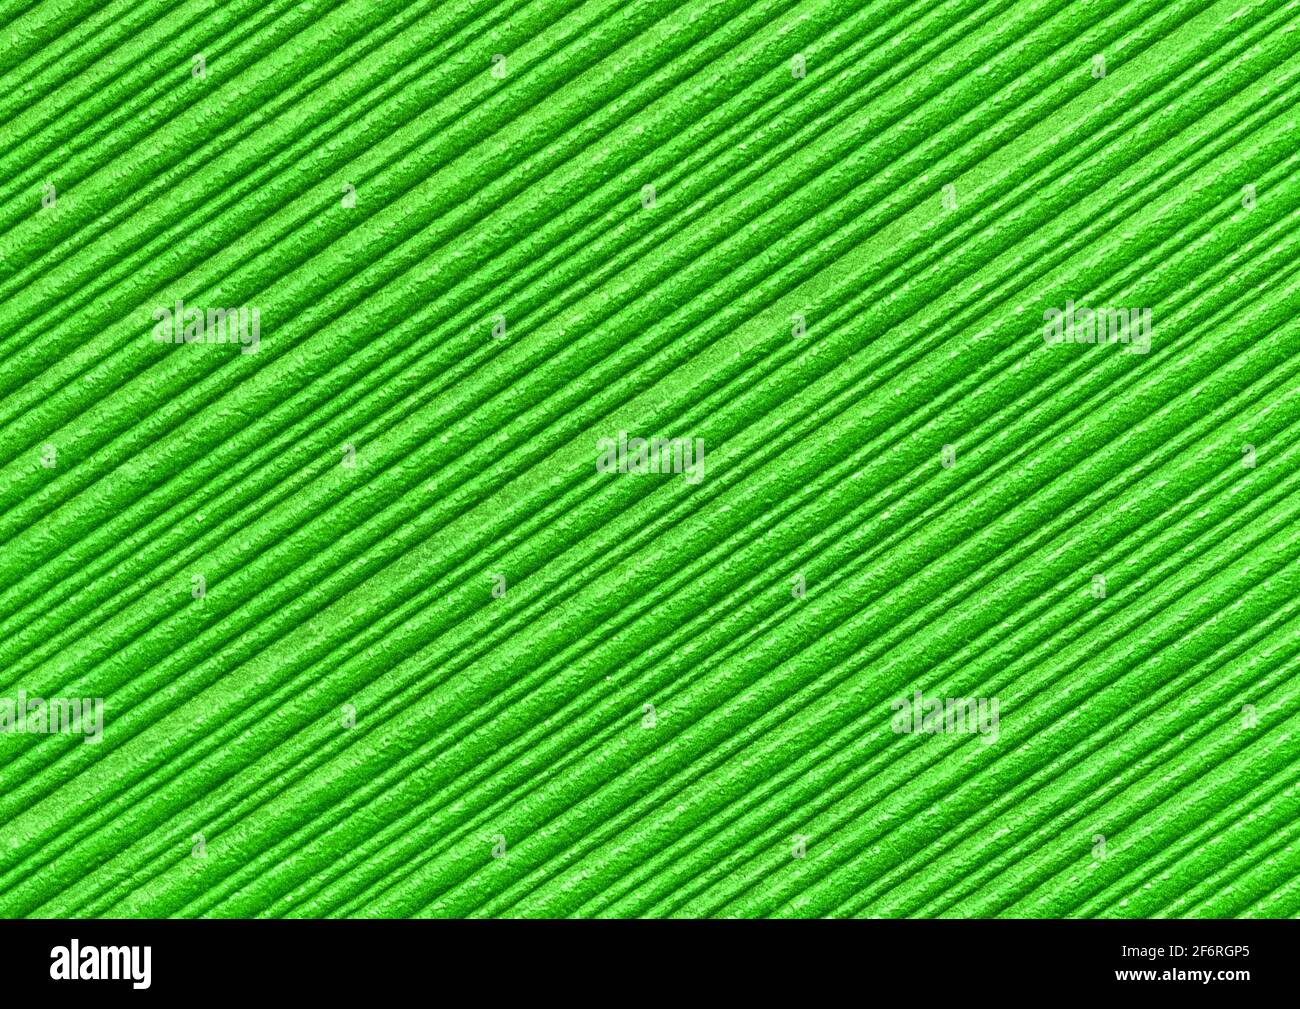 Green abstract striped pattern wallpaper background, paper texture with diagonal lines. Stock Photo